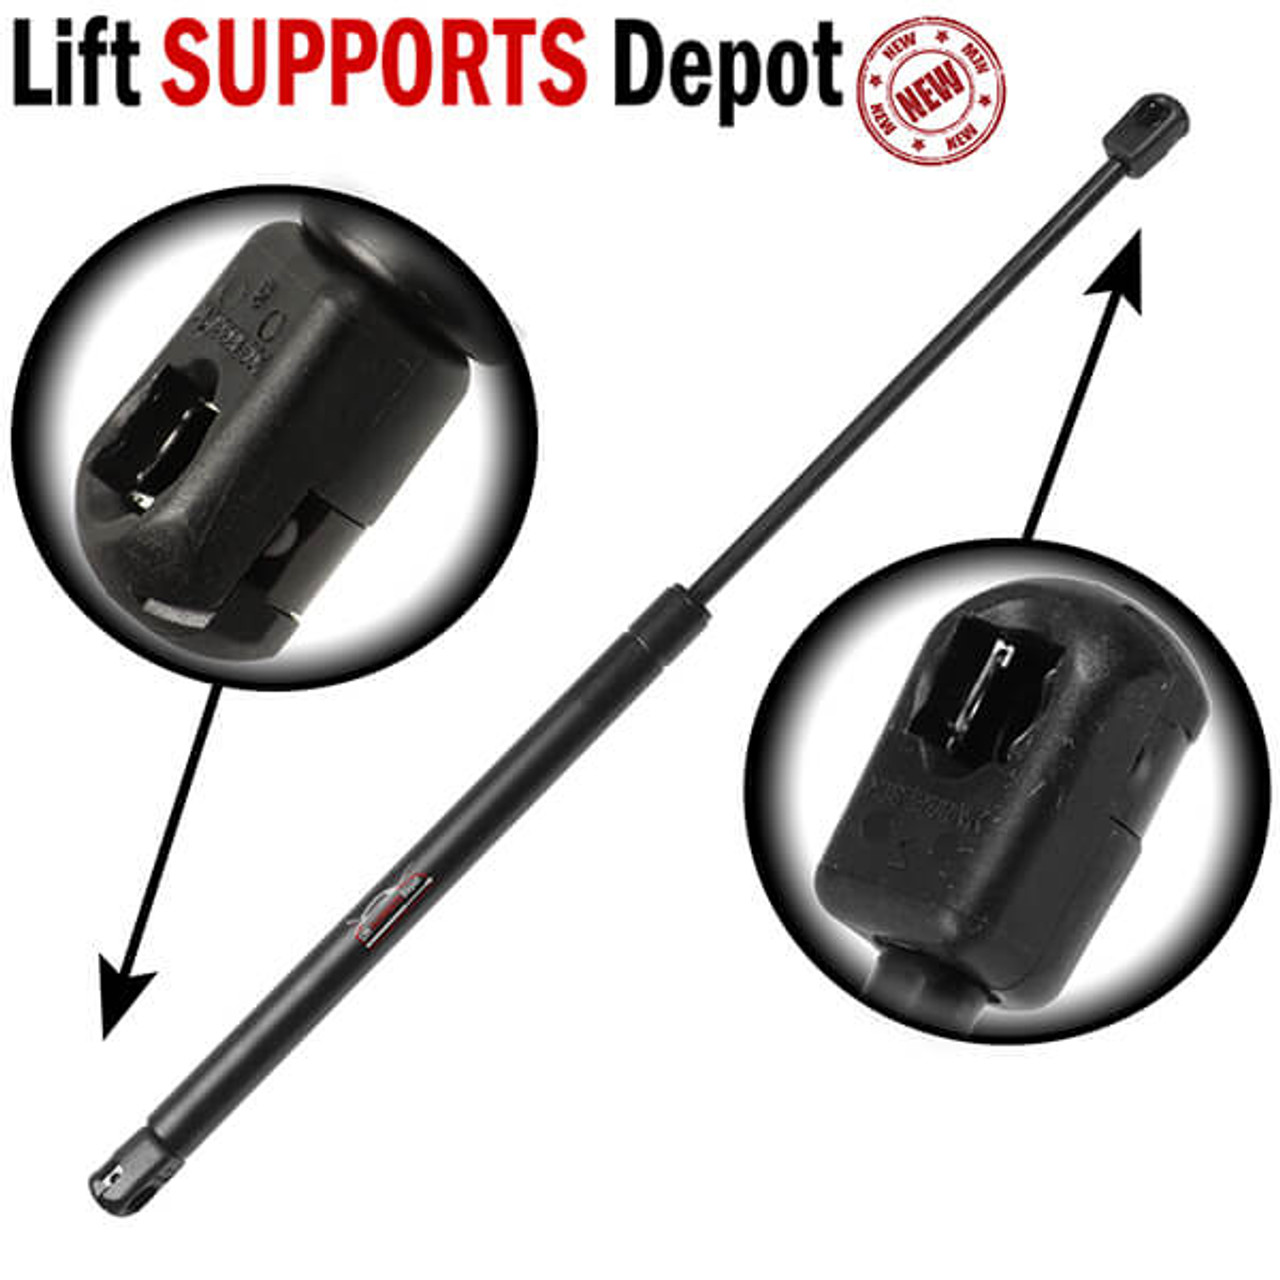 18.70 Inch x 40 Pound Lift Support With Ball Socket | SE187P40